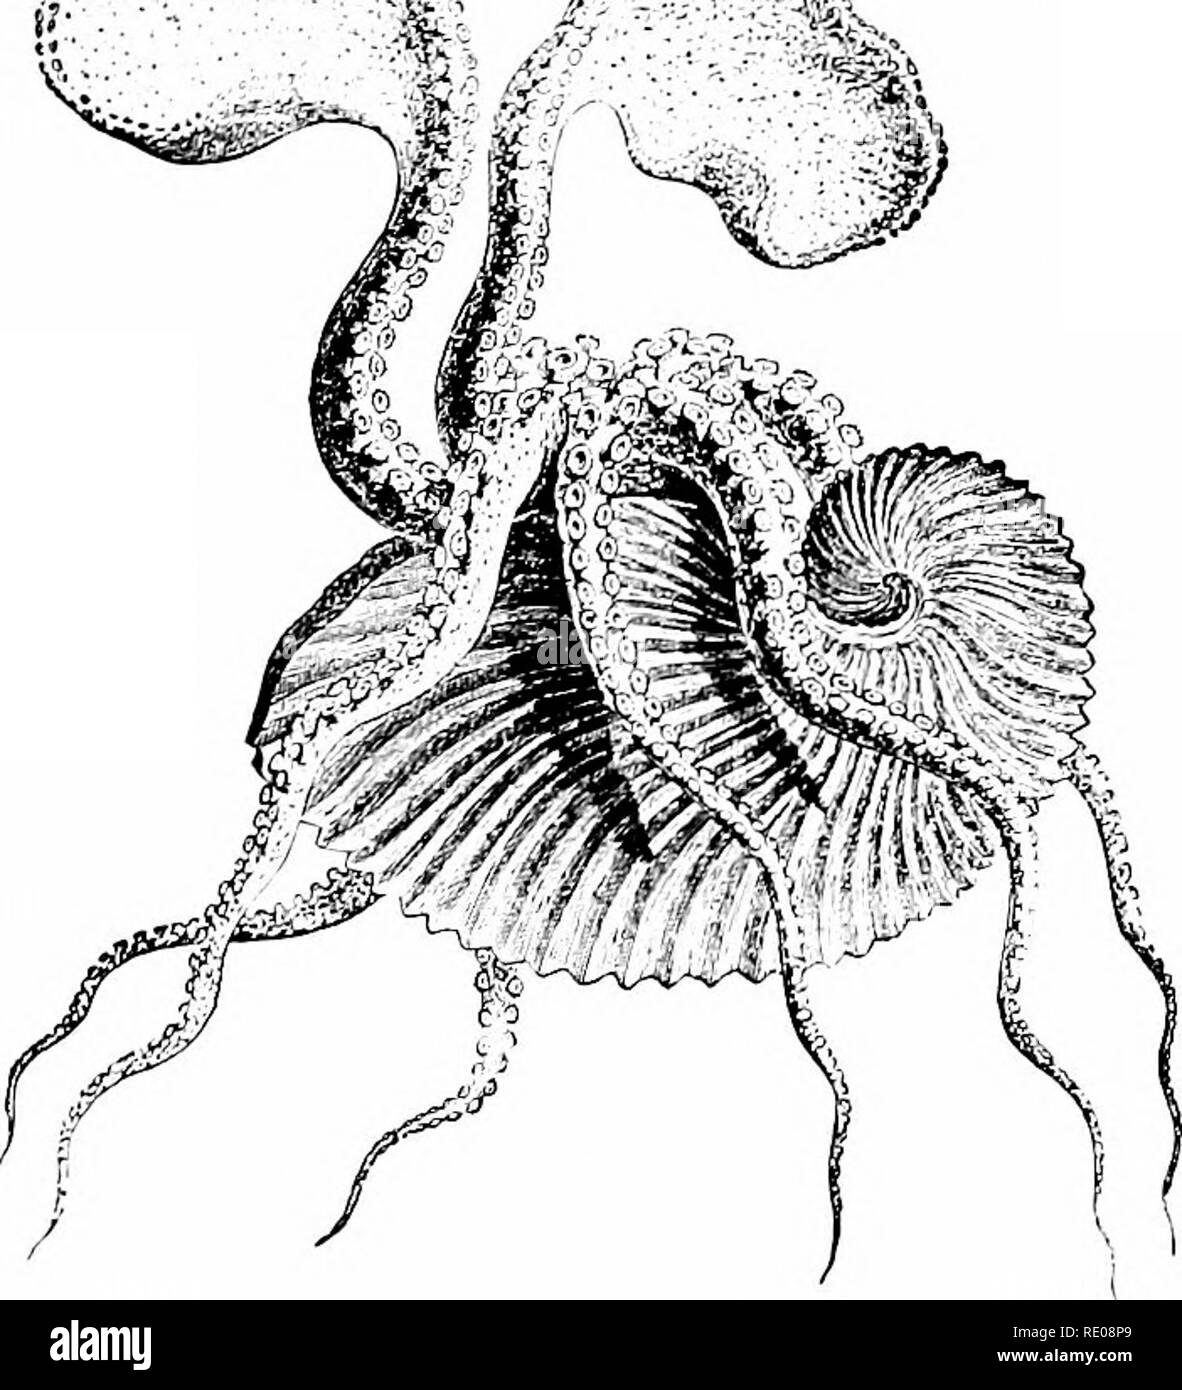 . A manual of zoology. Zoology. F. CEPHALOPODA : SUMMARY OF IMPORTANT FACTS. 395 and two oviducts. Ommastrejihes common in New England ; Archi- (&gt;?((«;(/«,* the giant squid (p. 384). Myopsida. Oviduct single (left); cornea unpei-forated. Loliijo* common squid ; Rossia*; Sepia, cuttle fish, fur- nishing the ' oiittle bone ' once used in medicine, now fed to cage birds, and the pigment sepia. Sub Order II. OCTOPODA. Eight arms webbed at their base; shell very rudimentary, sometimes fragmentary or wanting ; oviducts paired, ,^r^S?'-&quot;%. Fig. 388.—Argonauta argo, paper sailor, female. (Afte Stock Photo